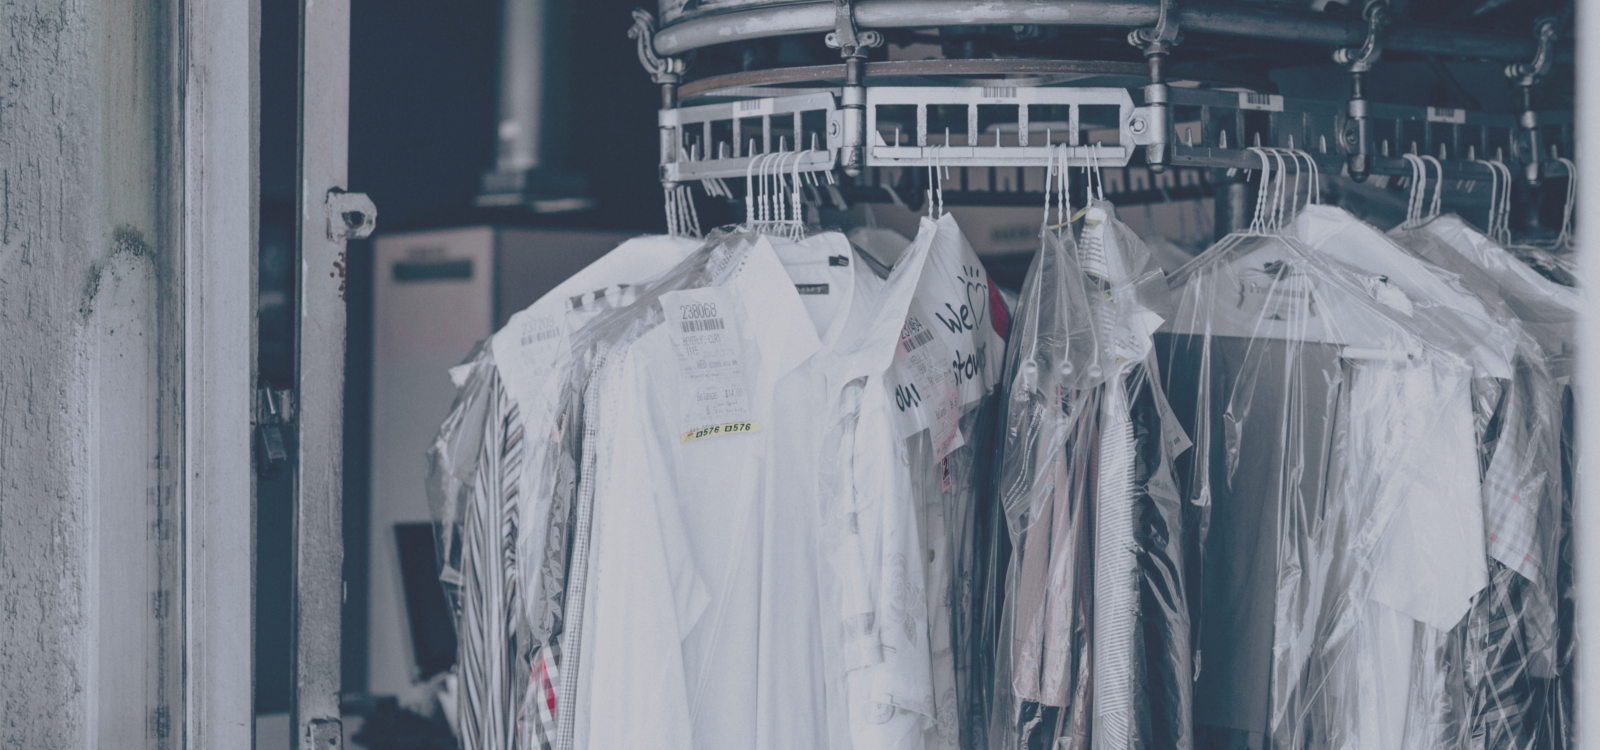 What Exactly Is Dry Cleaning And What Does It Do To Your Clothes?